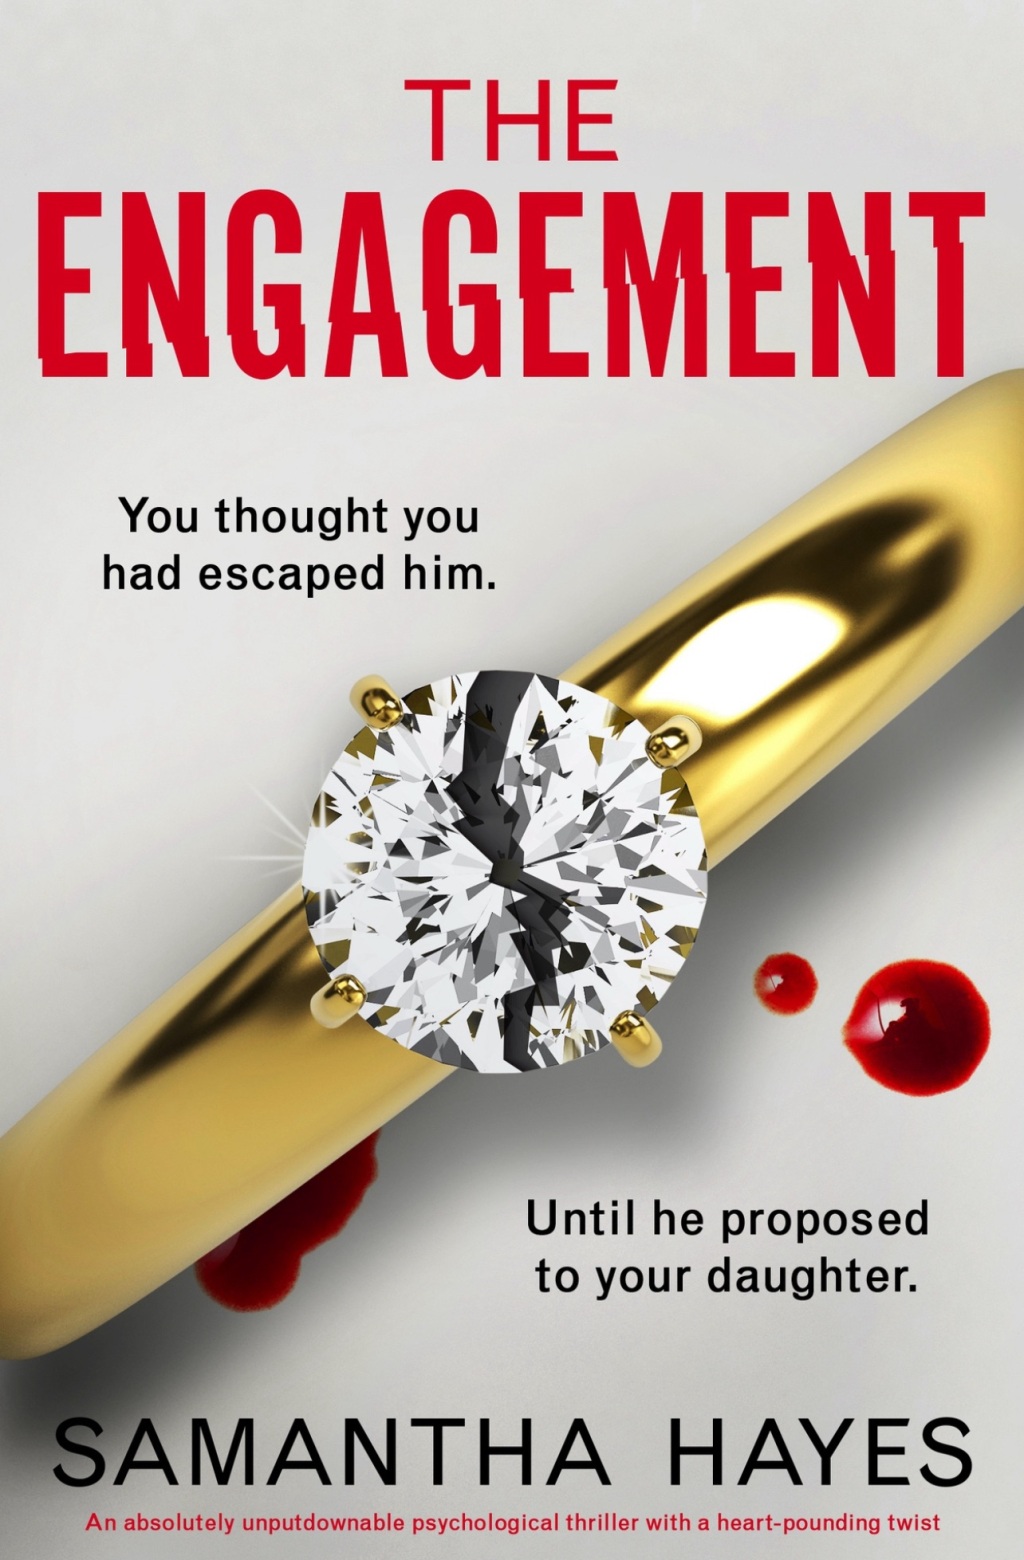 Book Review: The Engagement by Samantha Hayes